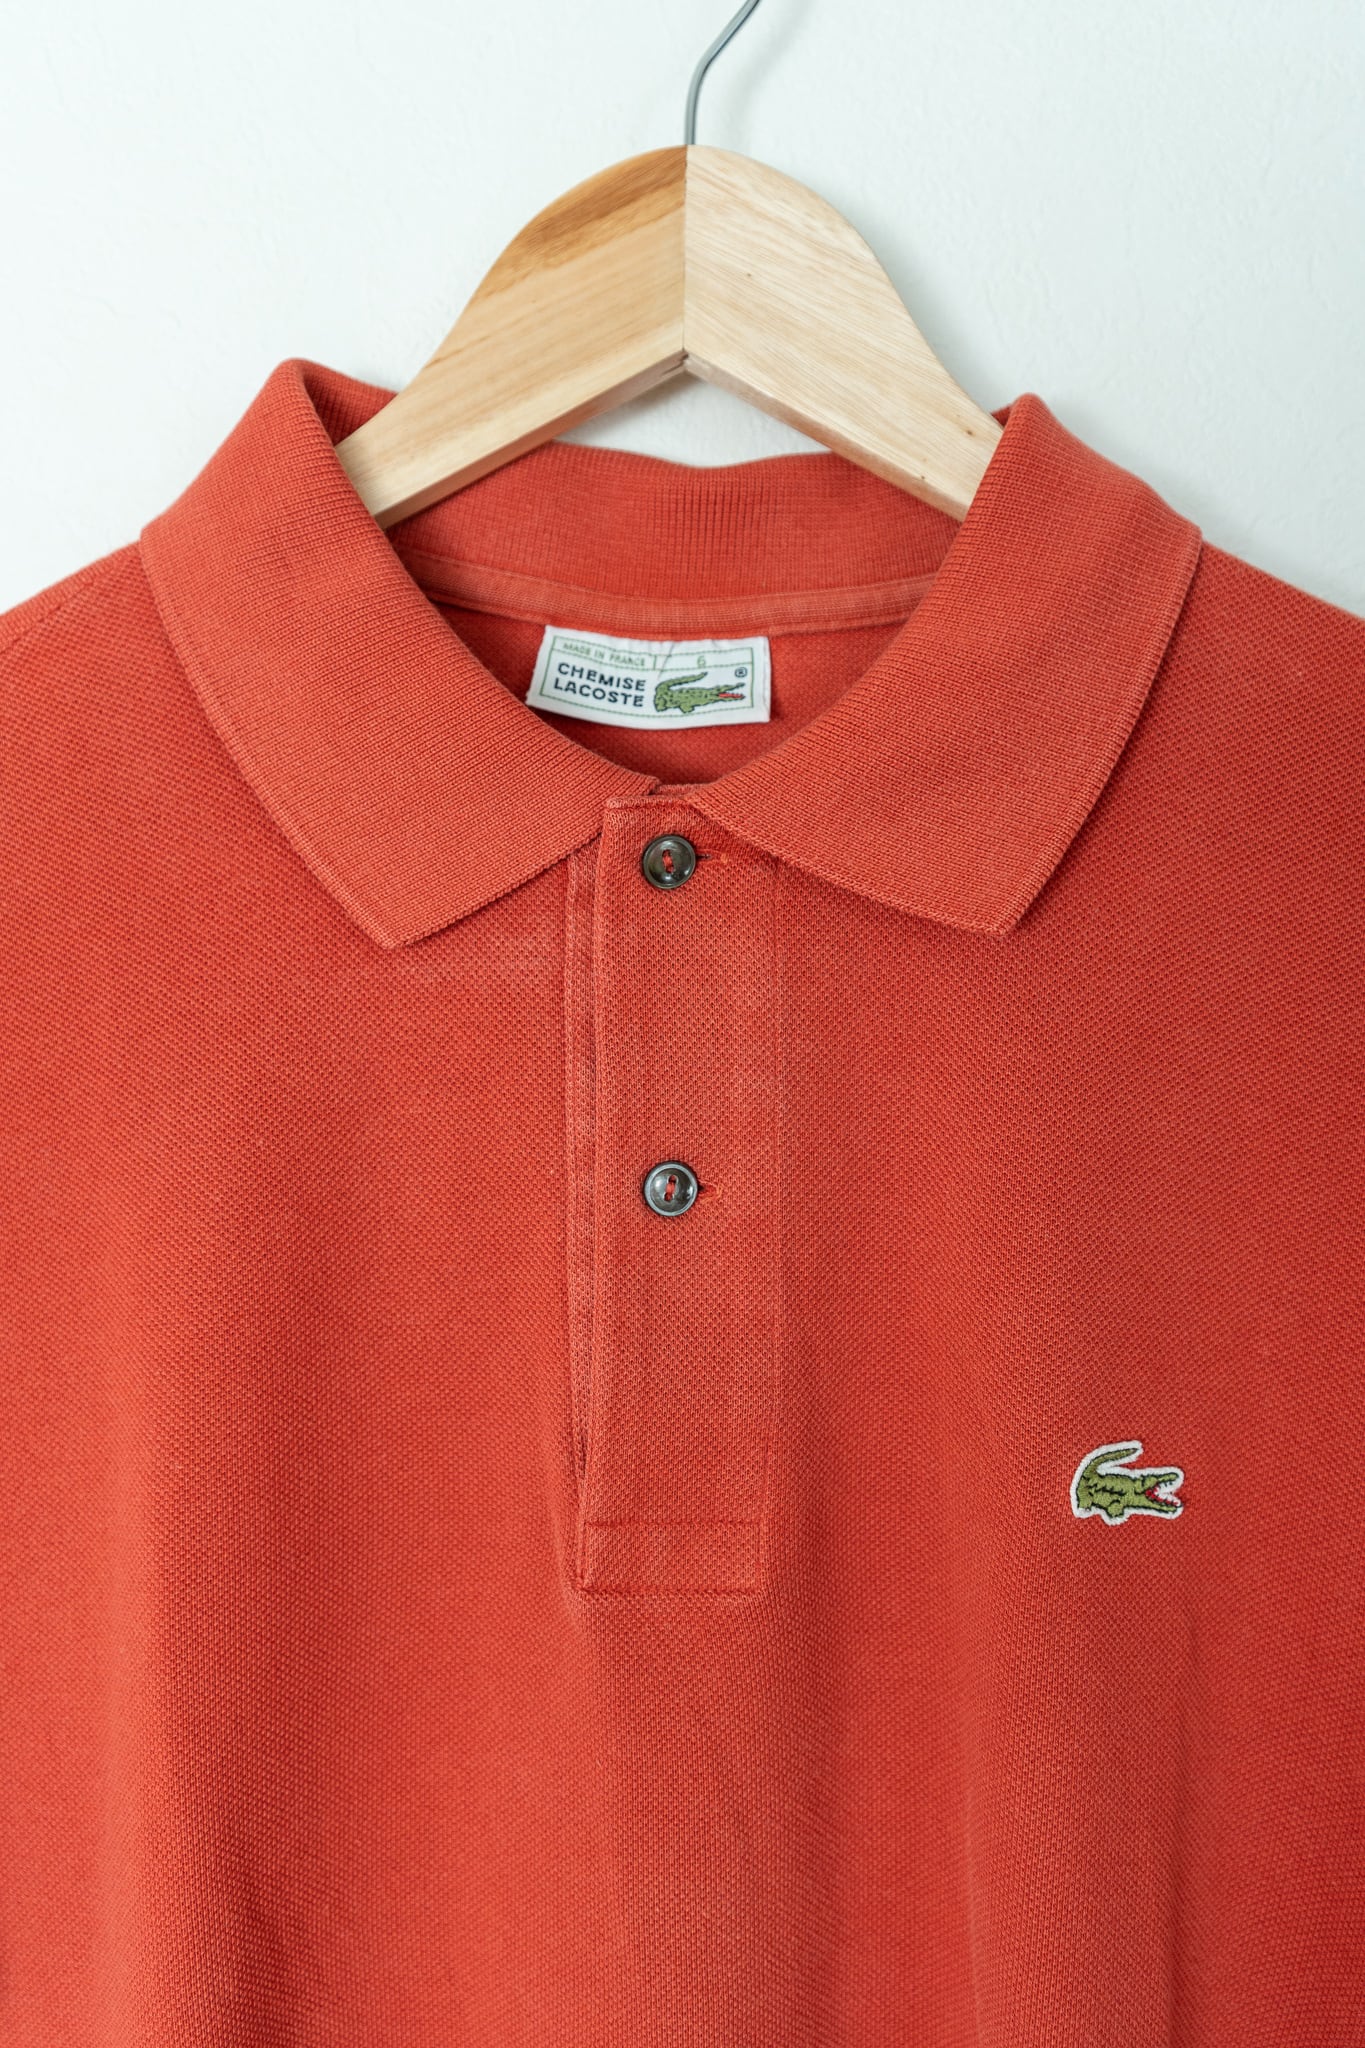 1970-80s】CHEMISE LACOSTE Polo Shirts Made in France フレンチラコステ ポロシャツ FL1 |  FAR EAST SIGNAL